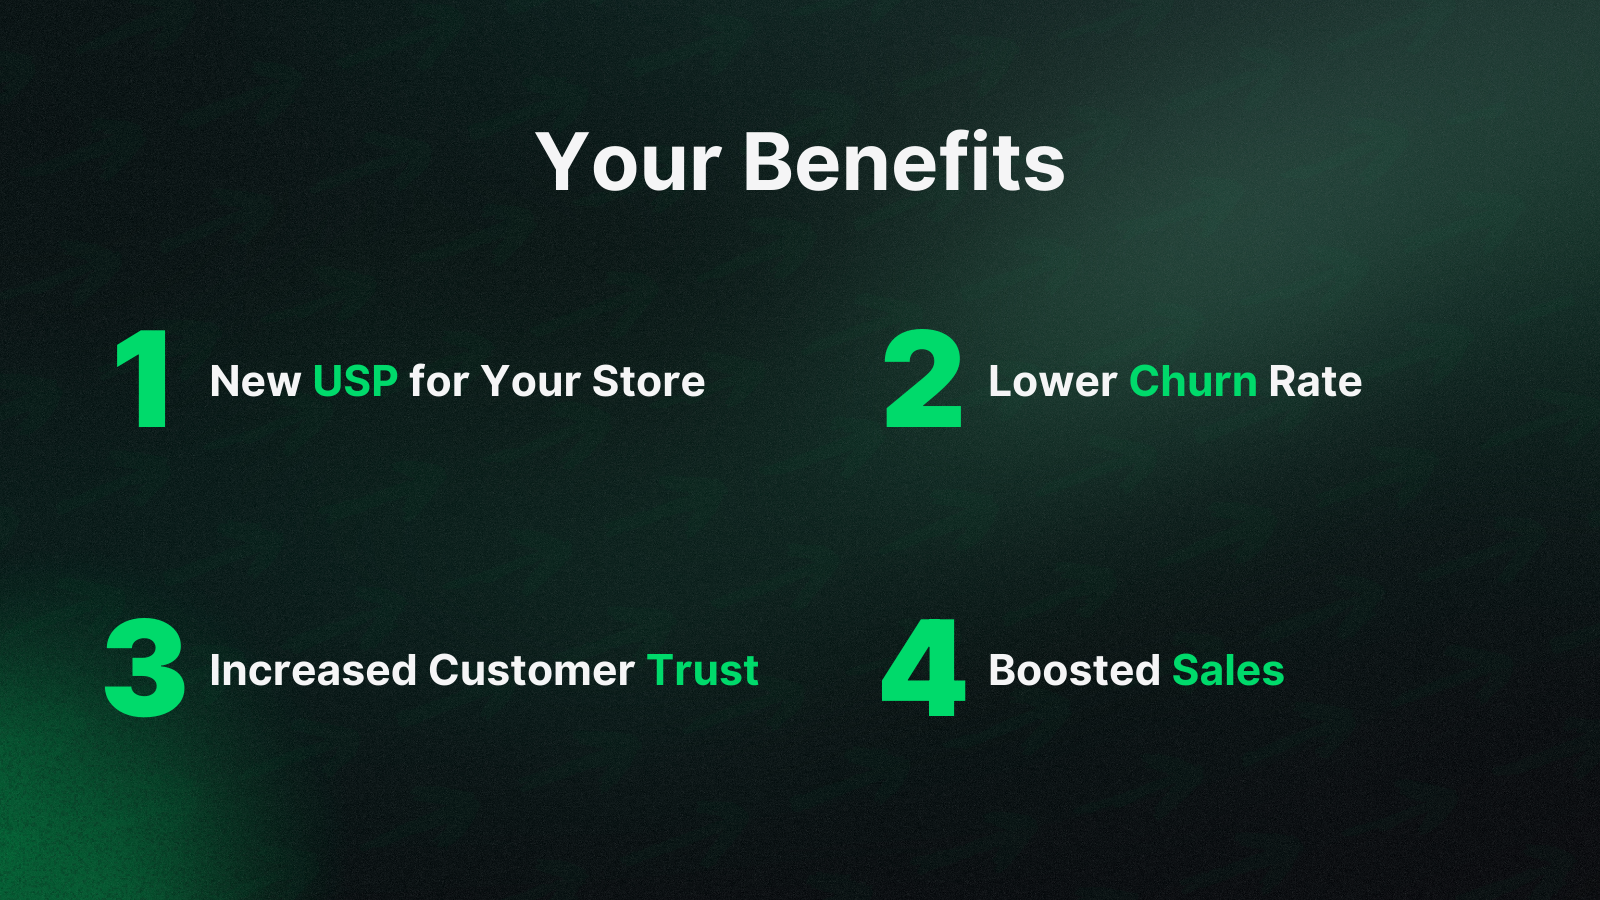 Lower churn rate, increase customer trust, and boost sales